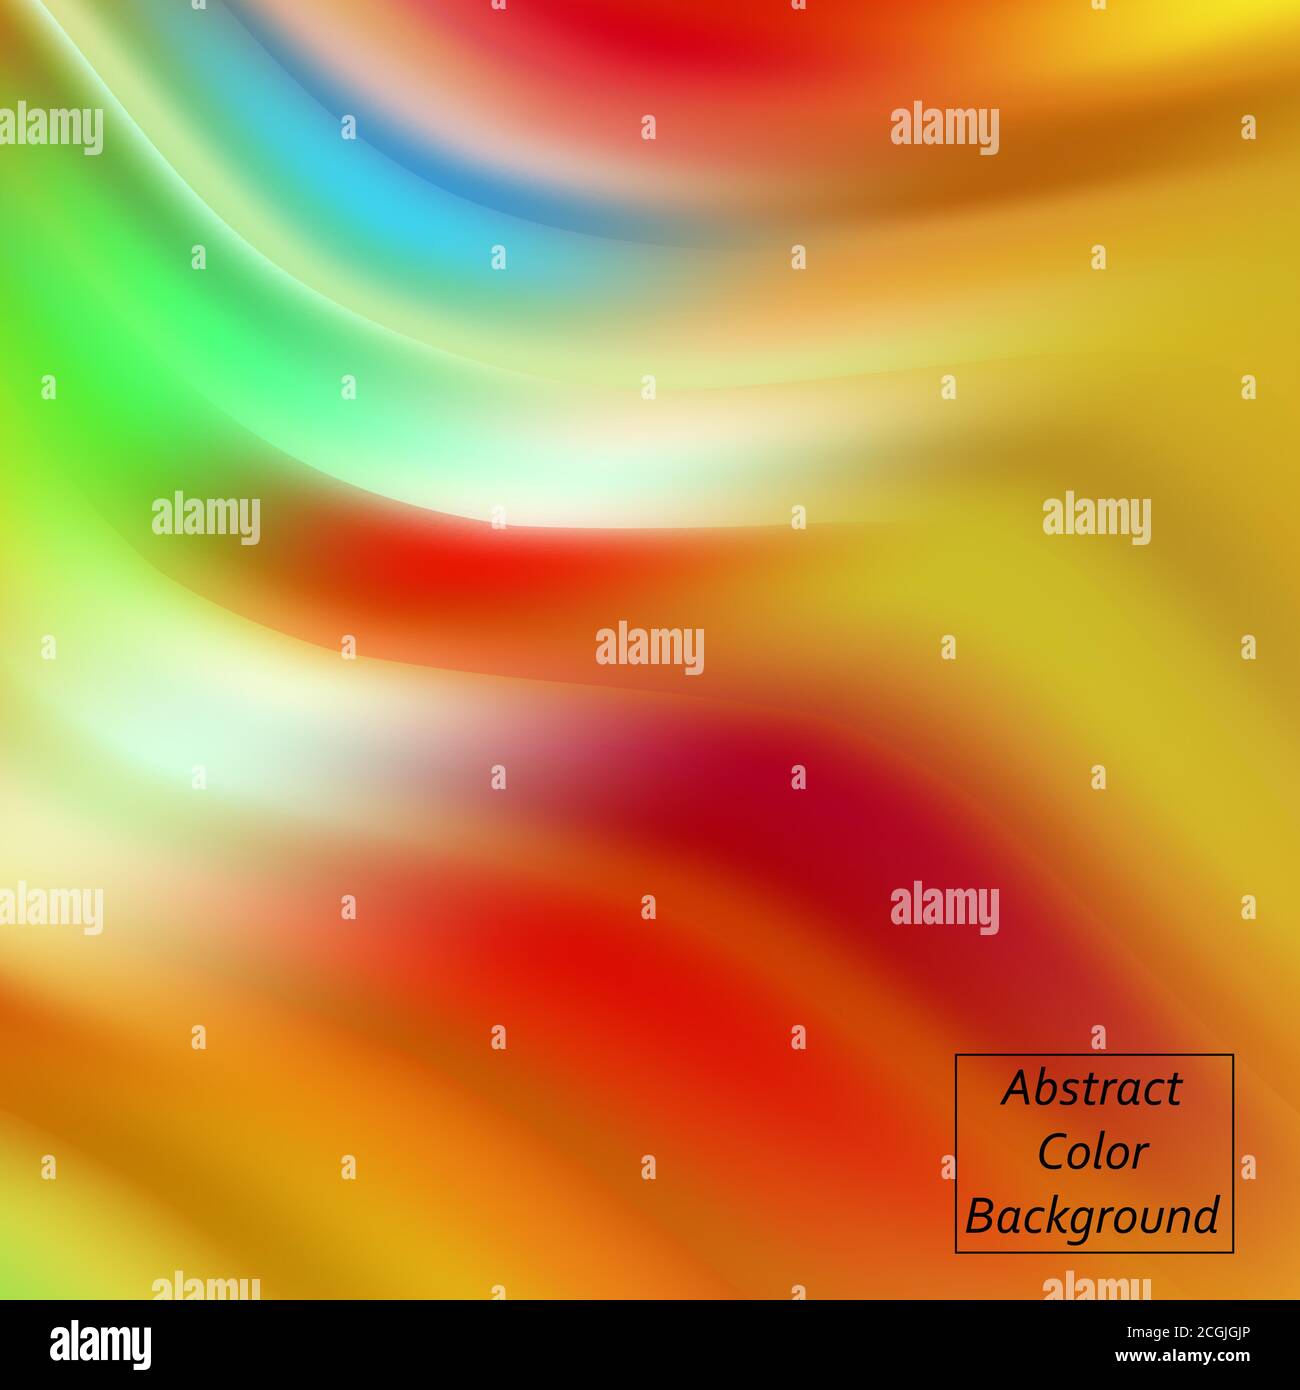 Abstract blurred gradient mesh background in vibrant rainbow colors. Colorful sleek banner template. Light editable soft color vector illustration in Stock Vector